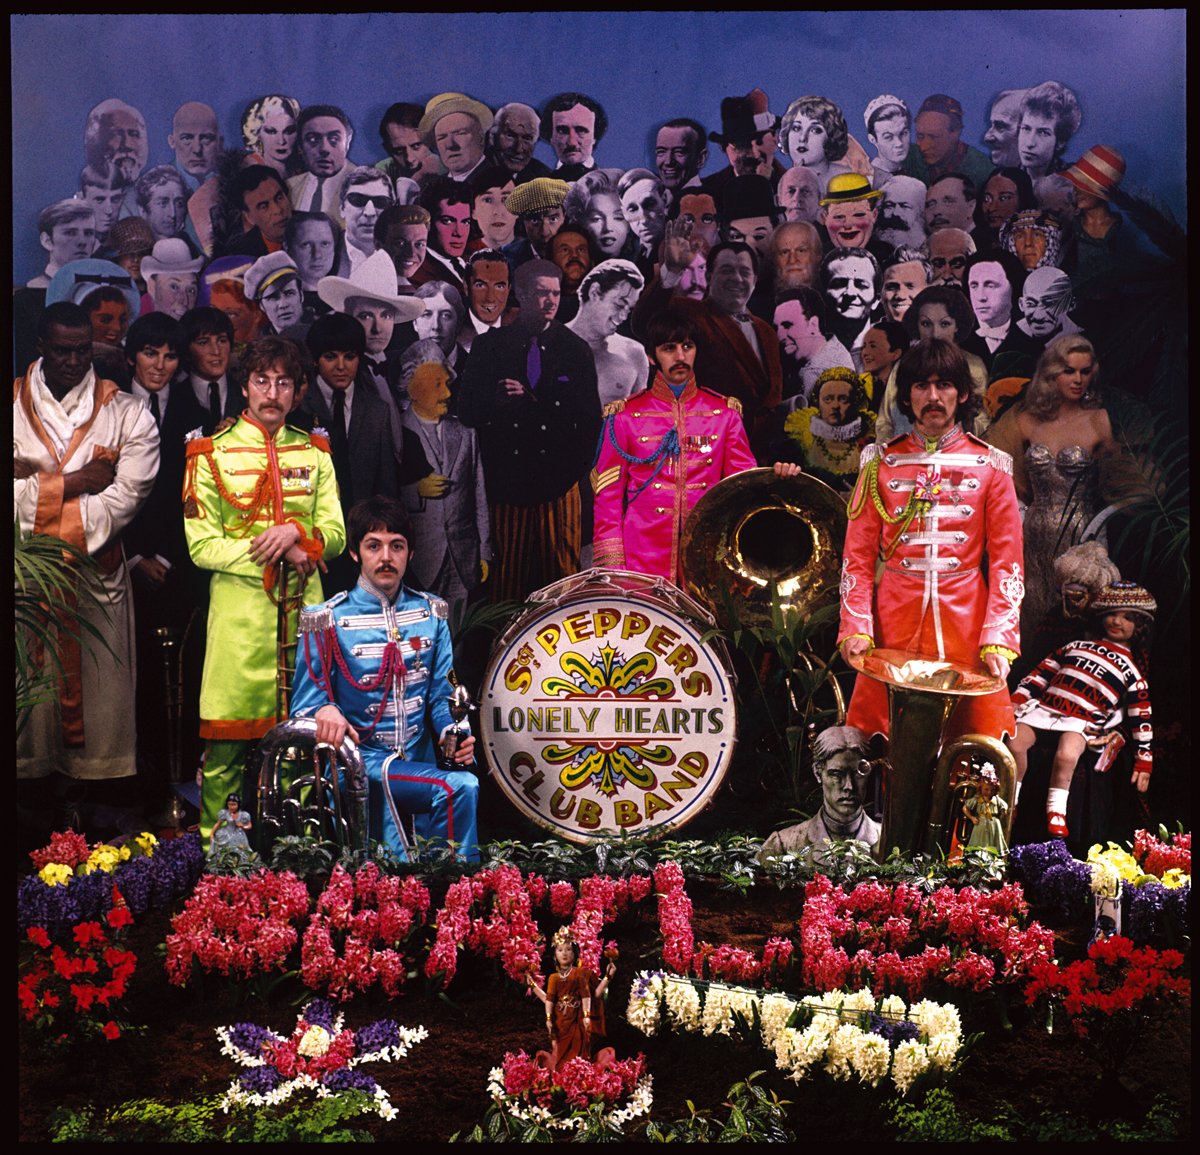 the beatles sgt peppers lonely hearts club band album cover